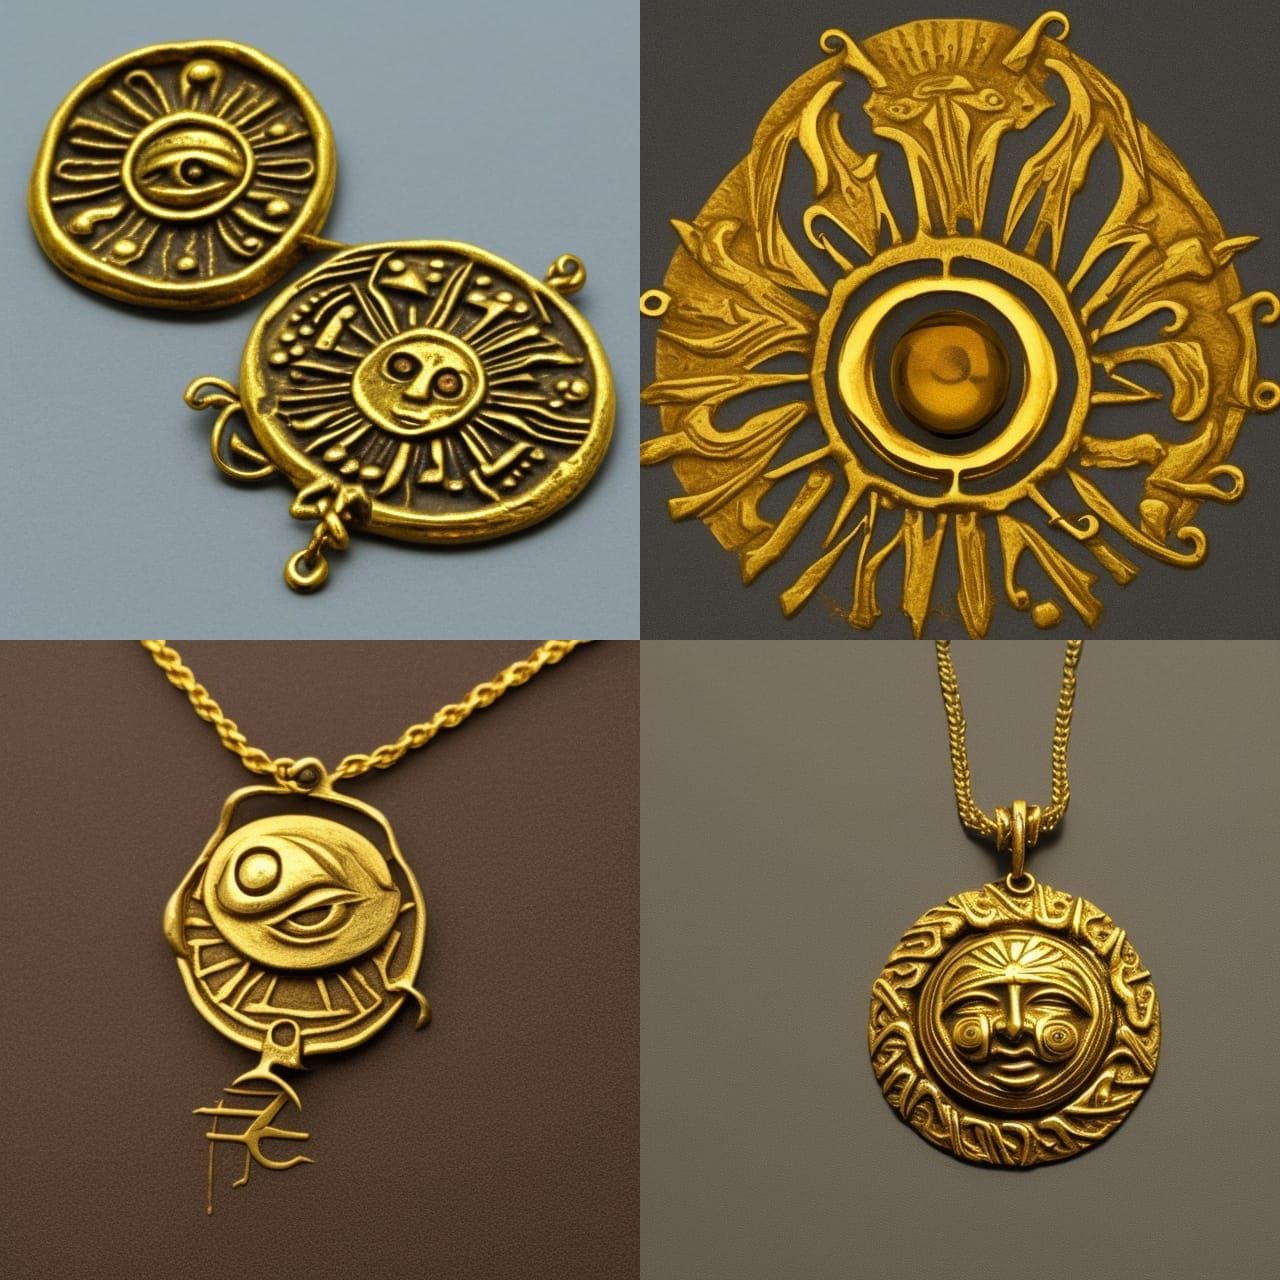 gold jewelry of an old Norse style sun icon with an eye in the center of it